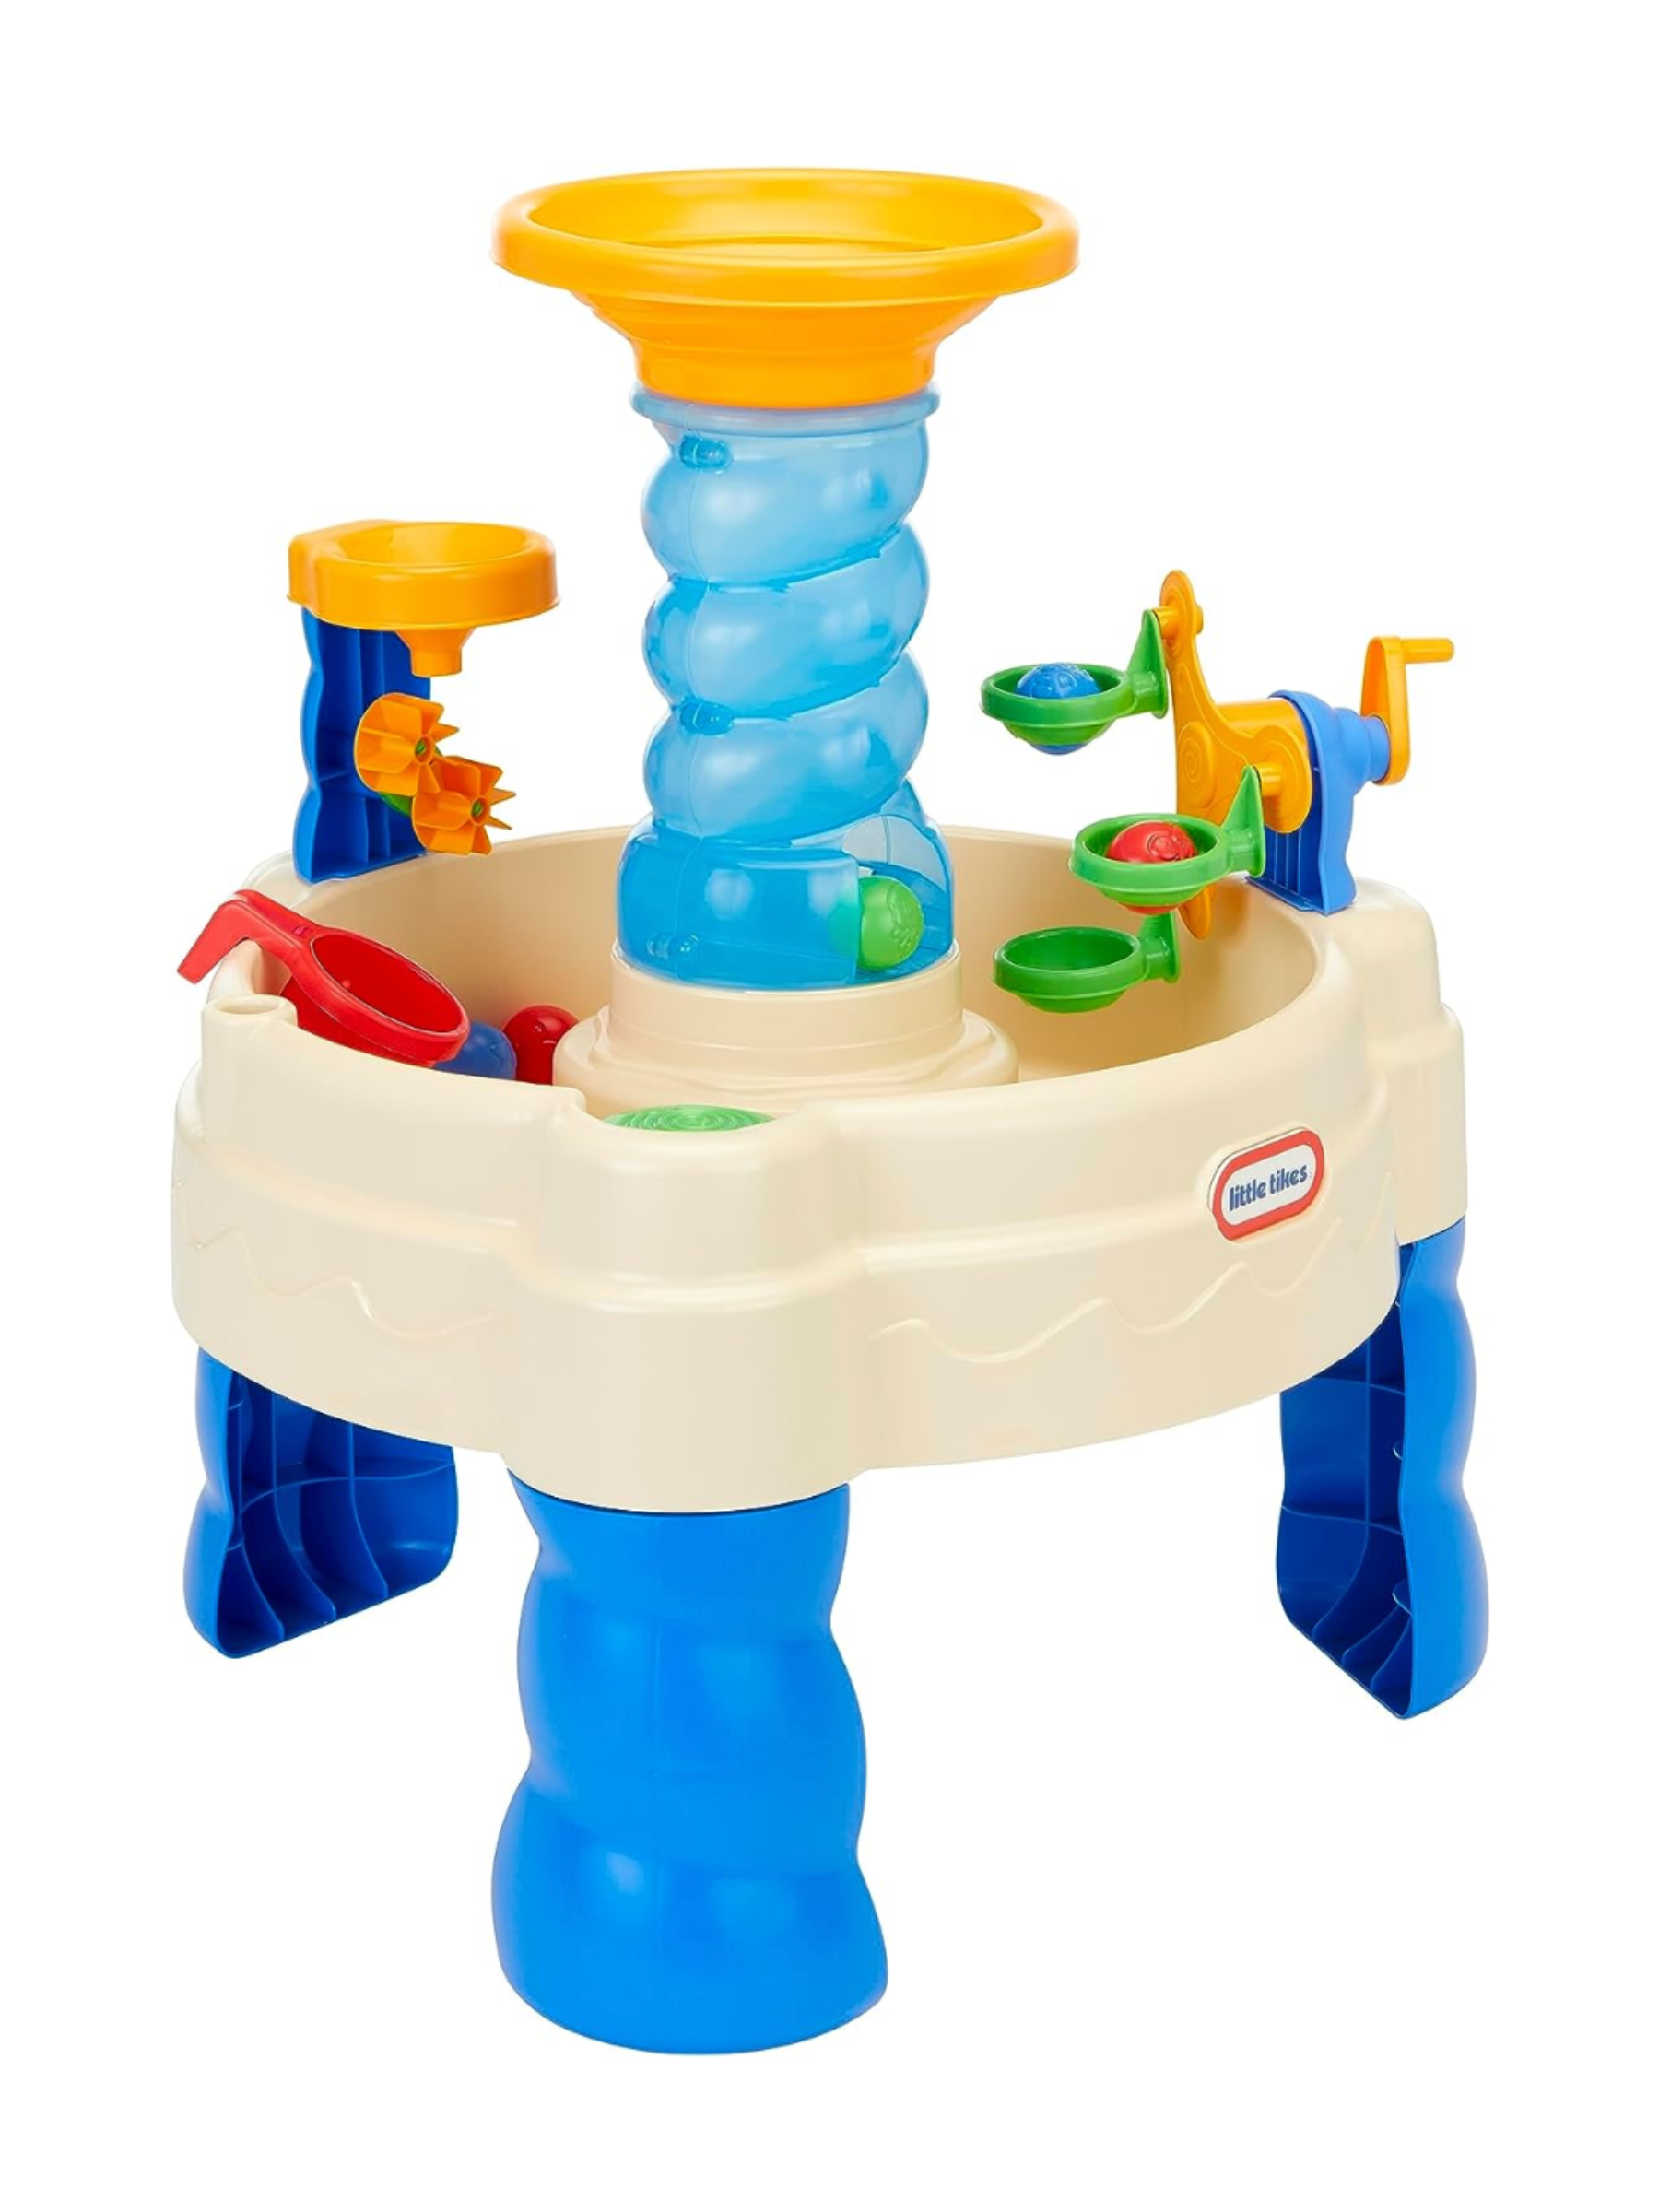 <p>Whether their baby loves bath time or not, a water table will blow their minds. And parents, trust me: It’s a savior when you want to kick your feet up. Whatever size you end up buying (this top-rated one has room for multiple kiddos to splish and splash), a “baby laughs or your money back” guarantee could come on the box.</p> <p><strong>What our expert says:</strong> “This toy makes hot days in the backyard so much more bearable (for both the parent and child!). My kids spent hours splashing about in this water table. It's perfect for playdates, too.” <em>— Earley</em></p> <p><em>Save when you shop for the best 1-year-old gifts with these</em> <em><a href="https://www.glamour.com/coupons/target?mbid=synd_msn_rss&utm_source=msn&utm_medium=syndication">Target promo codes</a>.</em></p> $55, Amazon. <a href="https://www.amazon.com/Little-Tikes-Spiralin-Waterpark-Table/dp/B004INDQWY/ref=">Get it now!</a><p>Sign up for today’s biggest stories, from pop culture to politics.</p><a href="https://www.glamour.com/newsletter/news?sourceCode=msnsend">Sign Up</a>